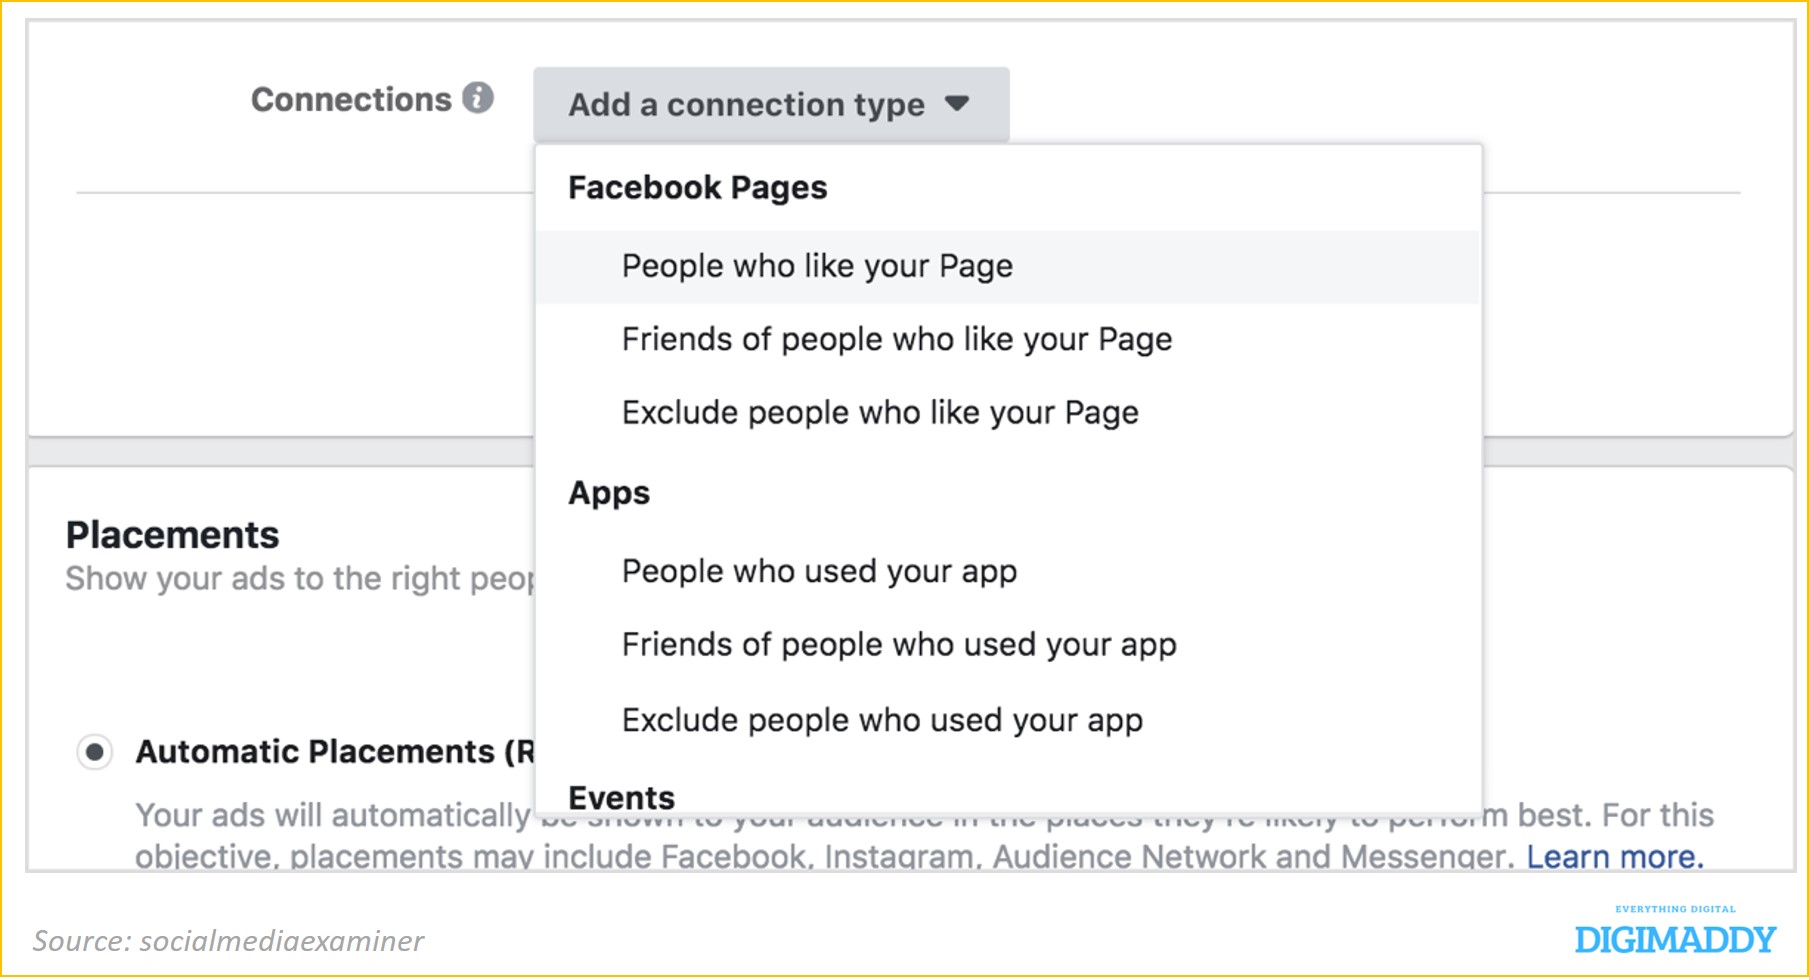 target your fb page existing user for more conversion